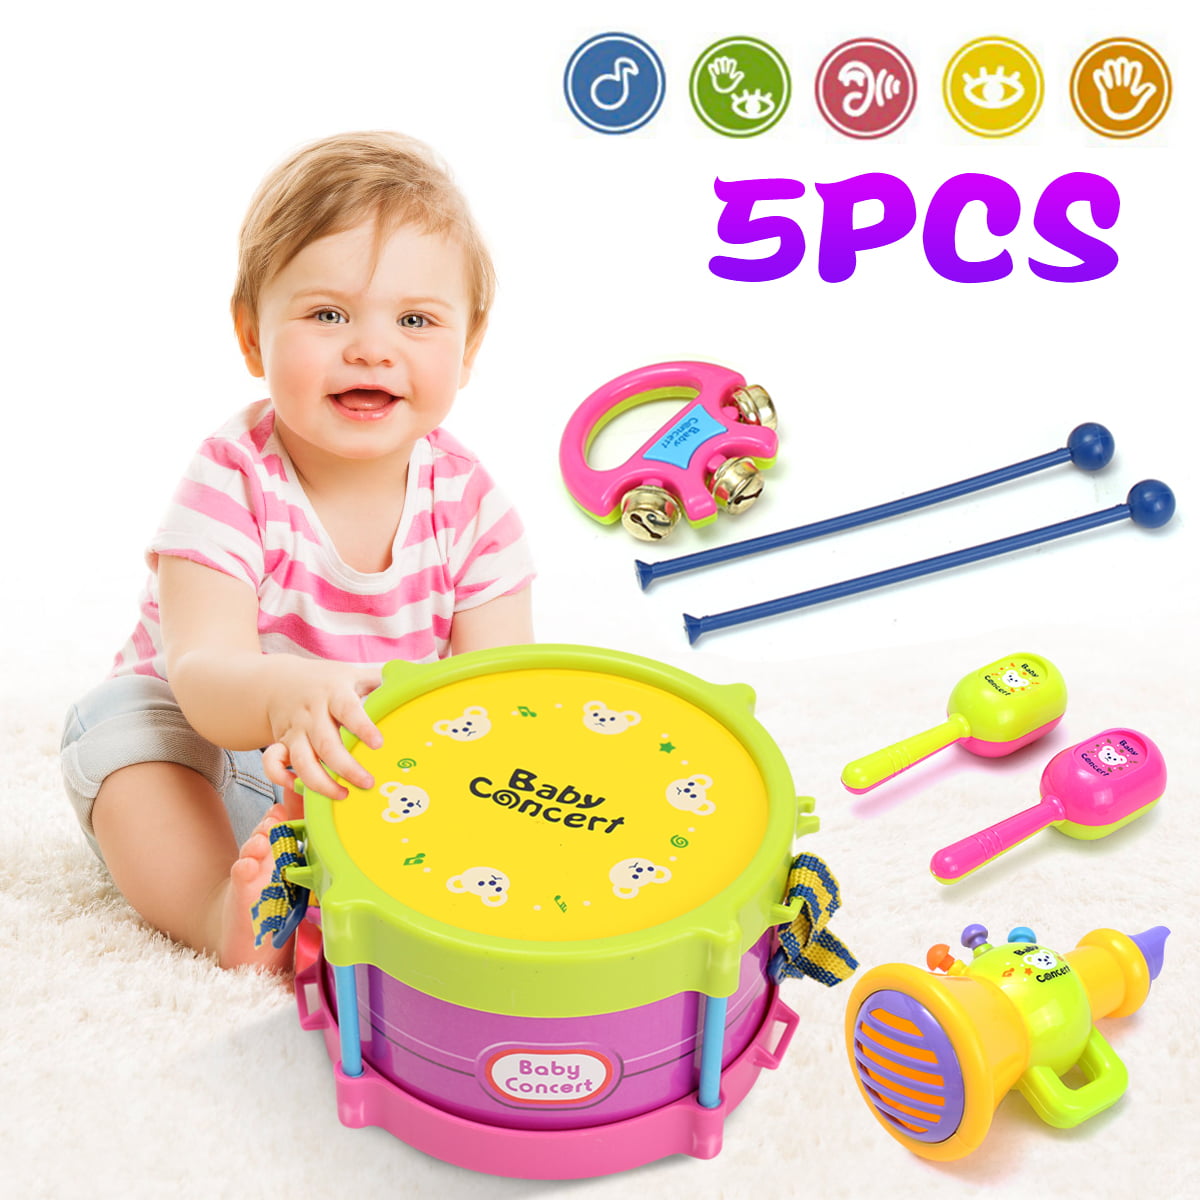 5PCS Kids Baby Roll Drum Musical Instruments Band Kit Children Toy US Stock 